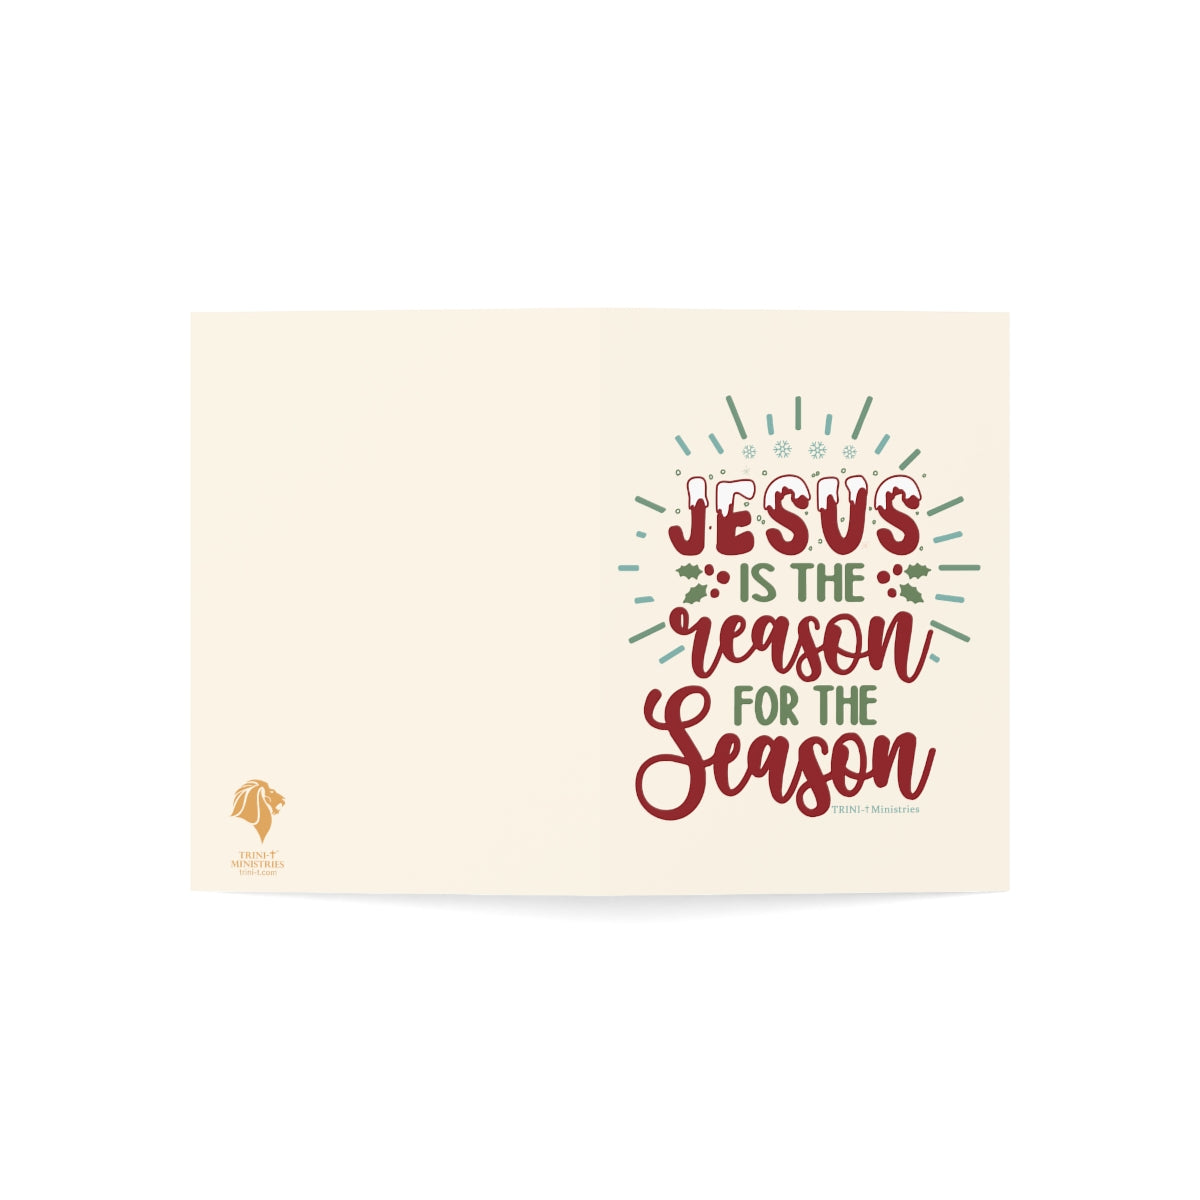 Reason for the Season -  Greeting Cards (1, 10, 30, and 50pcs)